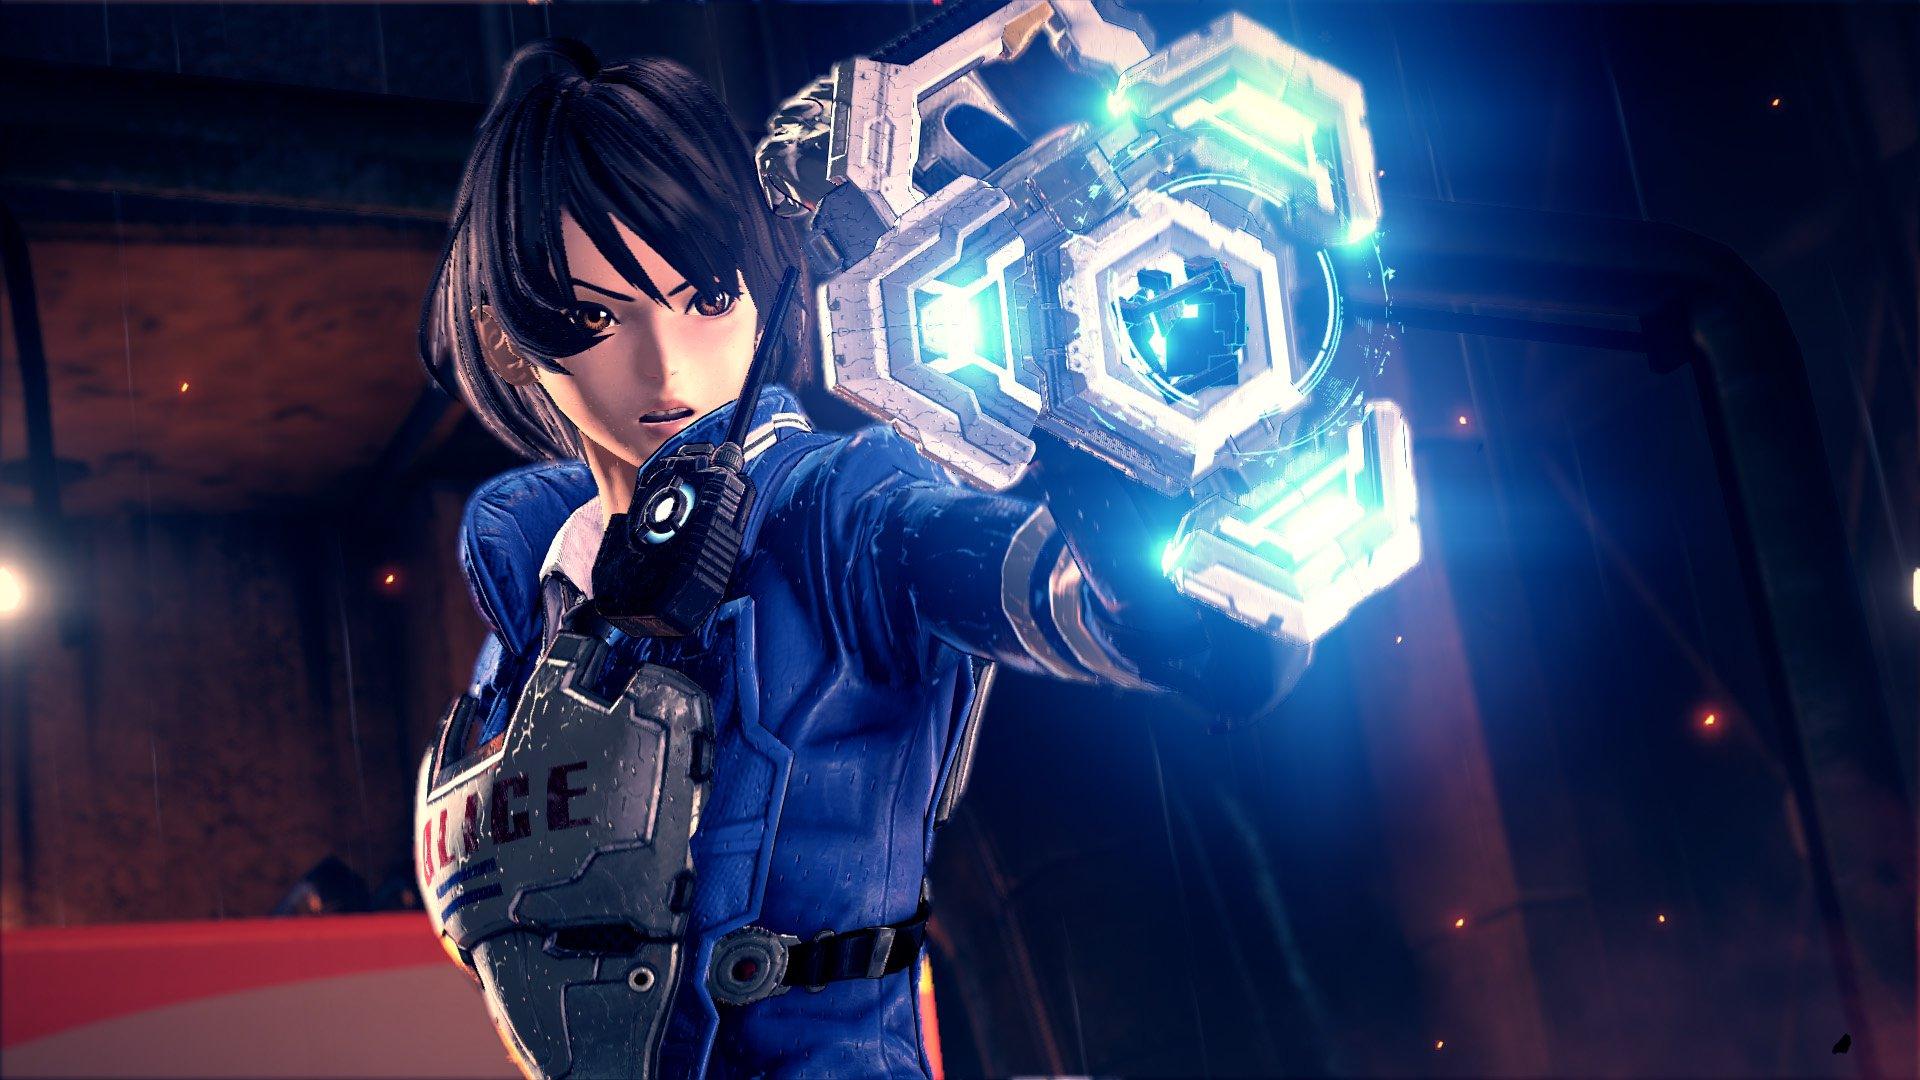 Video: Watch Almost 10 Minutes Of PlatinumGames' Astral Chain In New